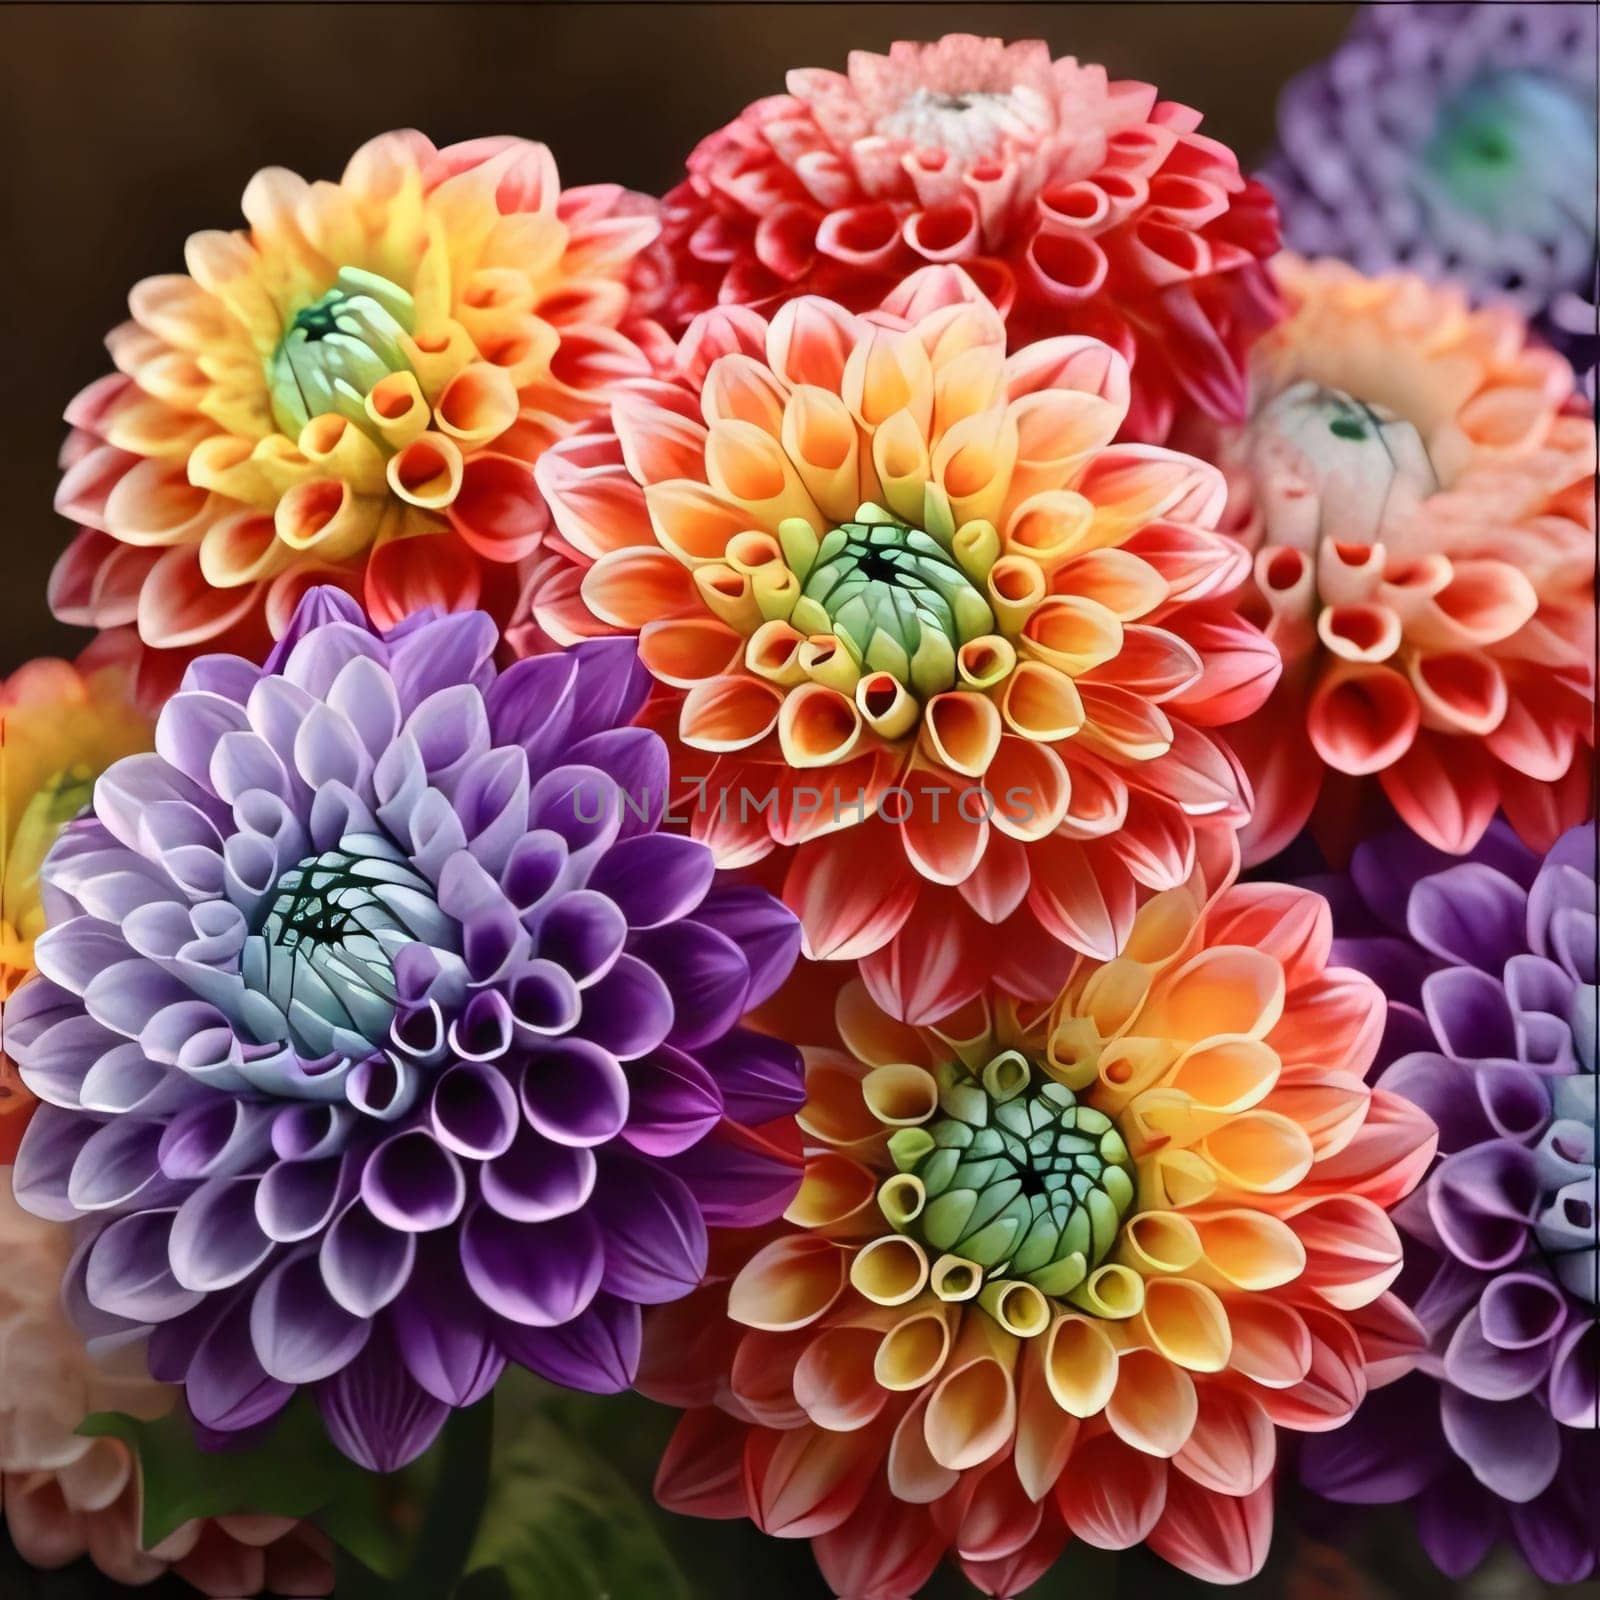 Colorful dahlia flowers. Flowering flowers, a symbol of spring, new life. A joyful time of nature waking up to life.